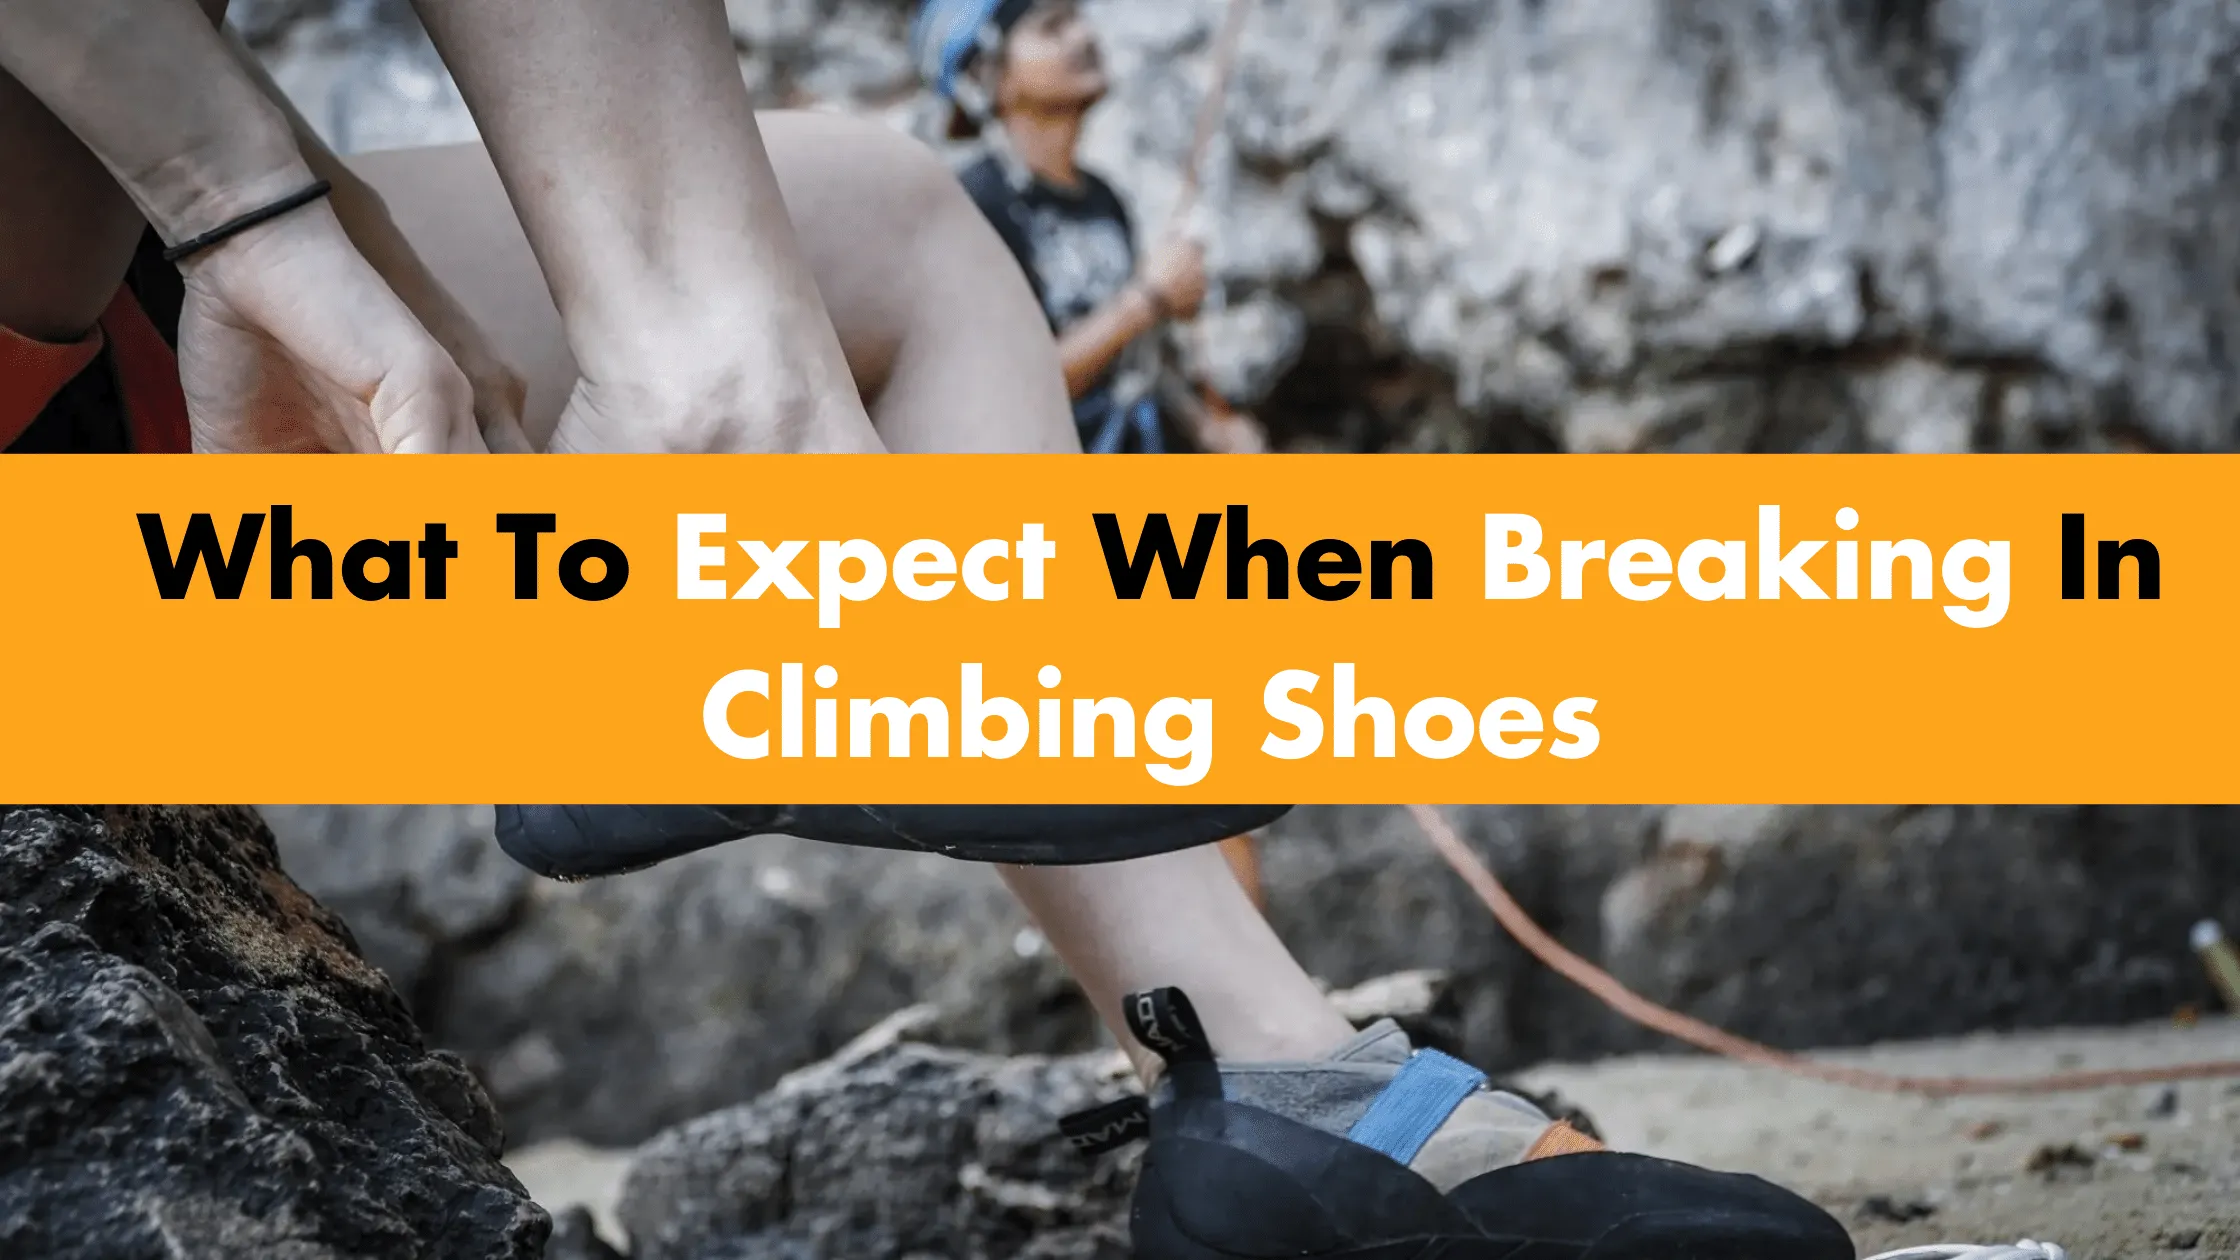 What To Expect When Breaking In Climbing Shoes